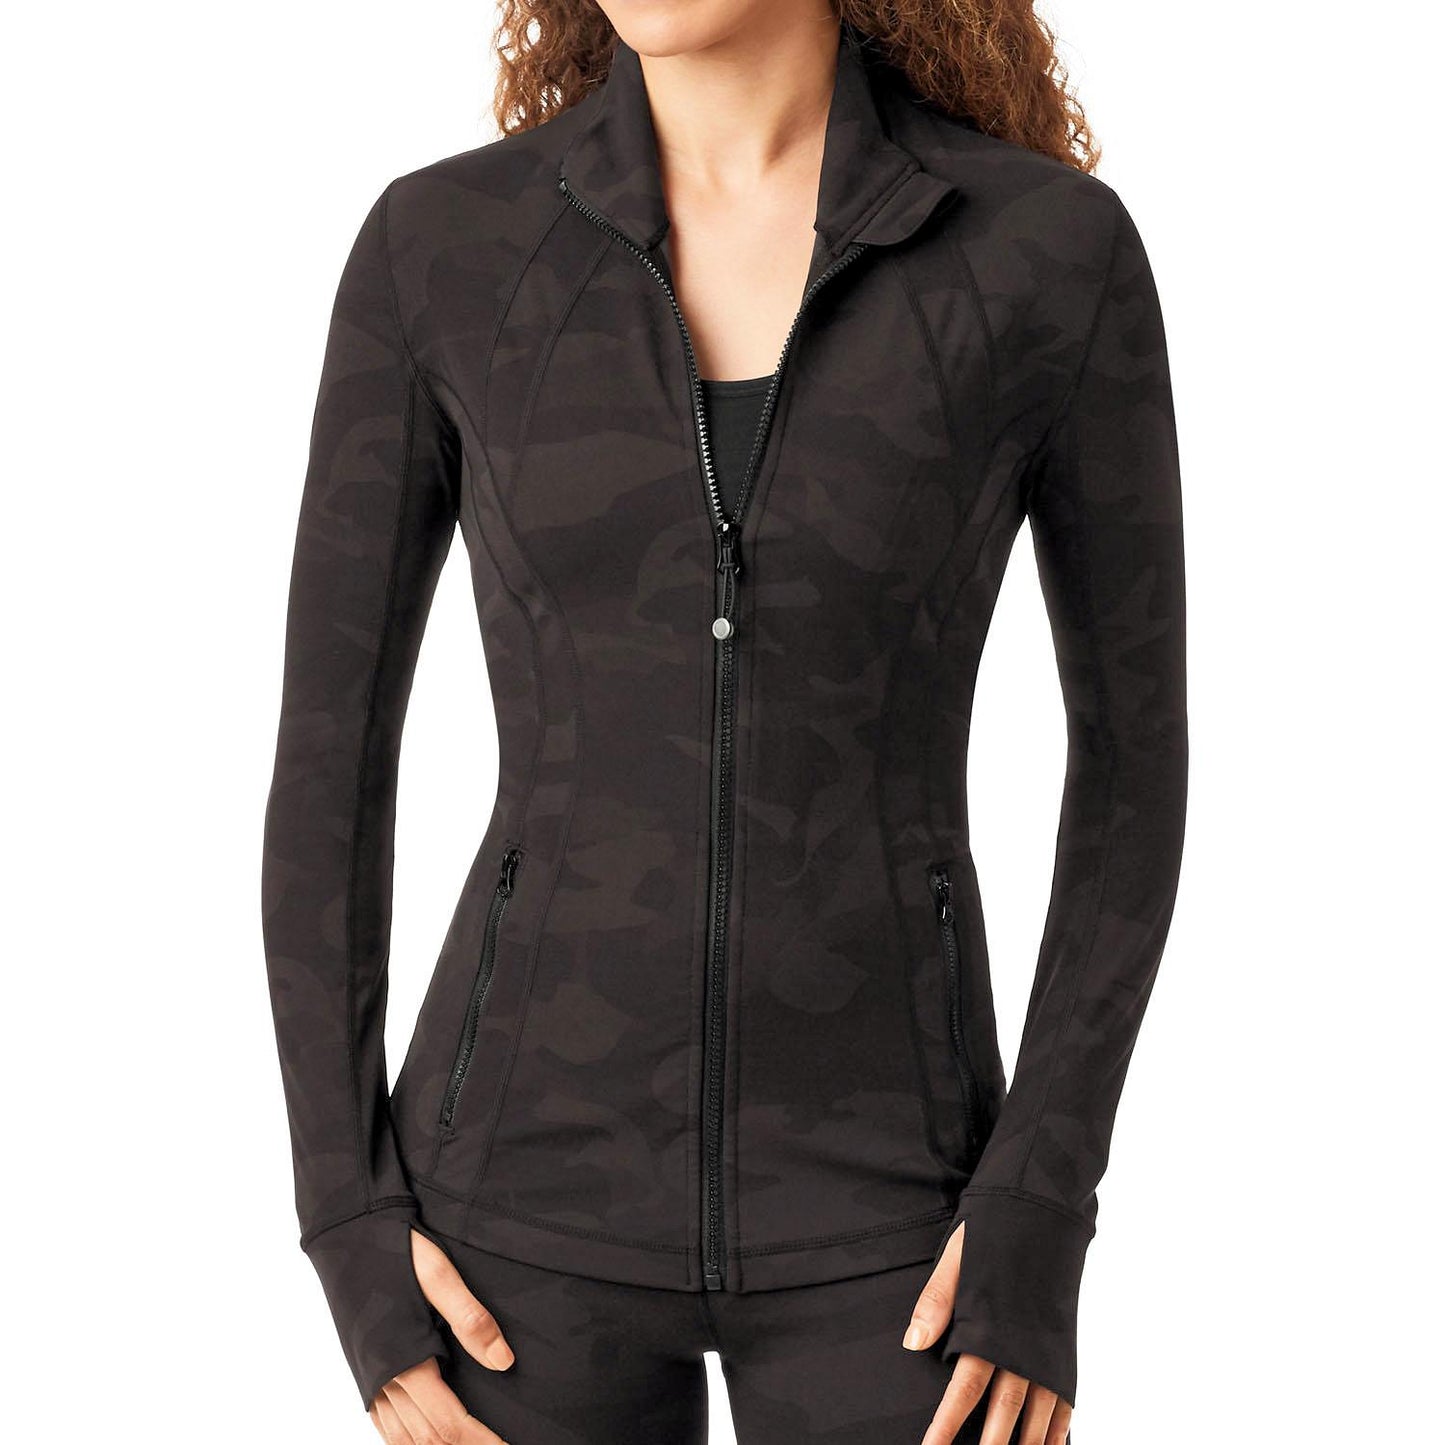 Zen Zip Up Semi Fitted Printed Active Jacket with Thumbhole